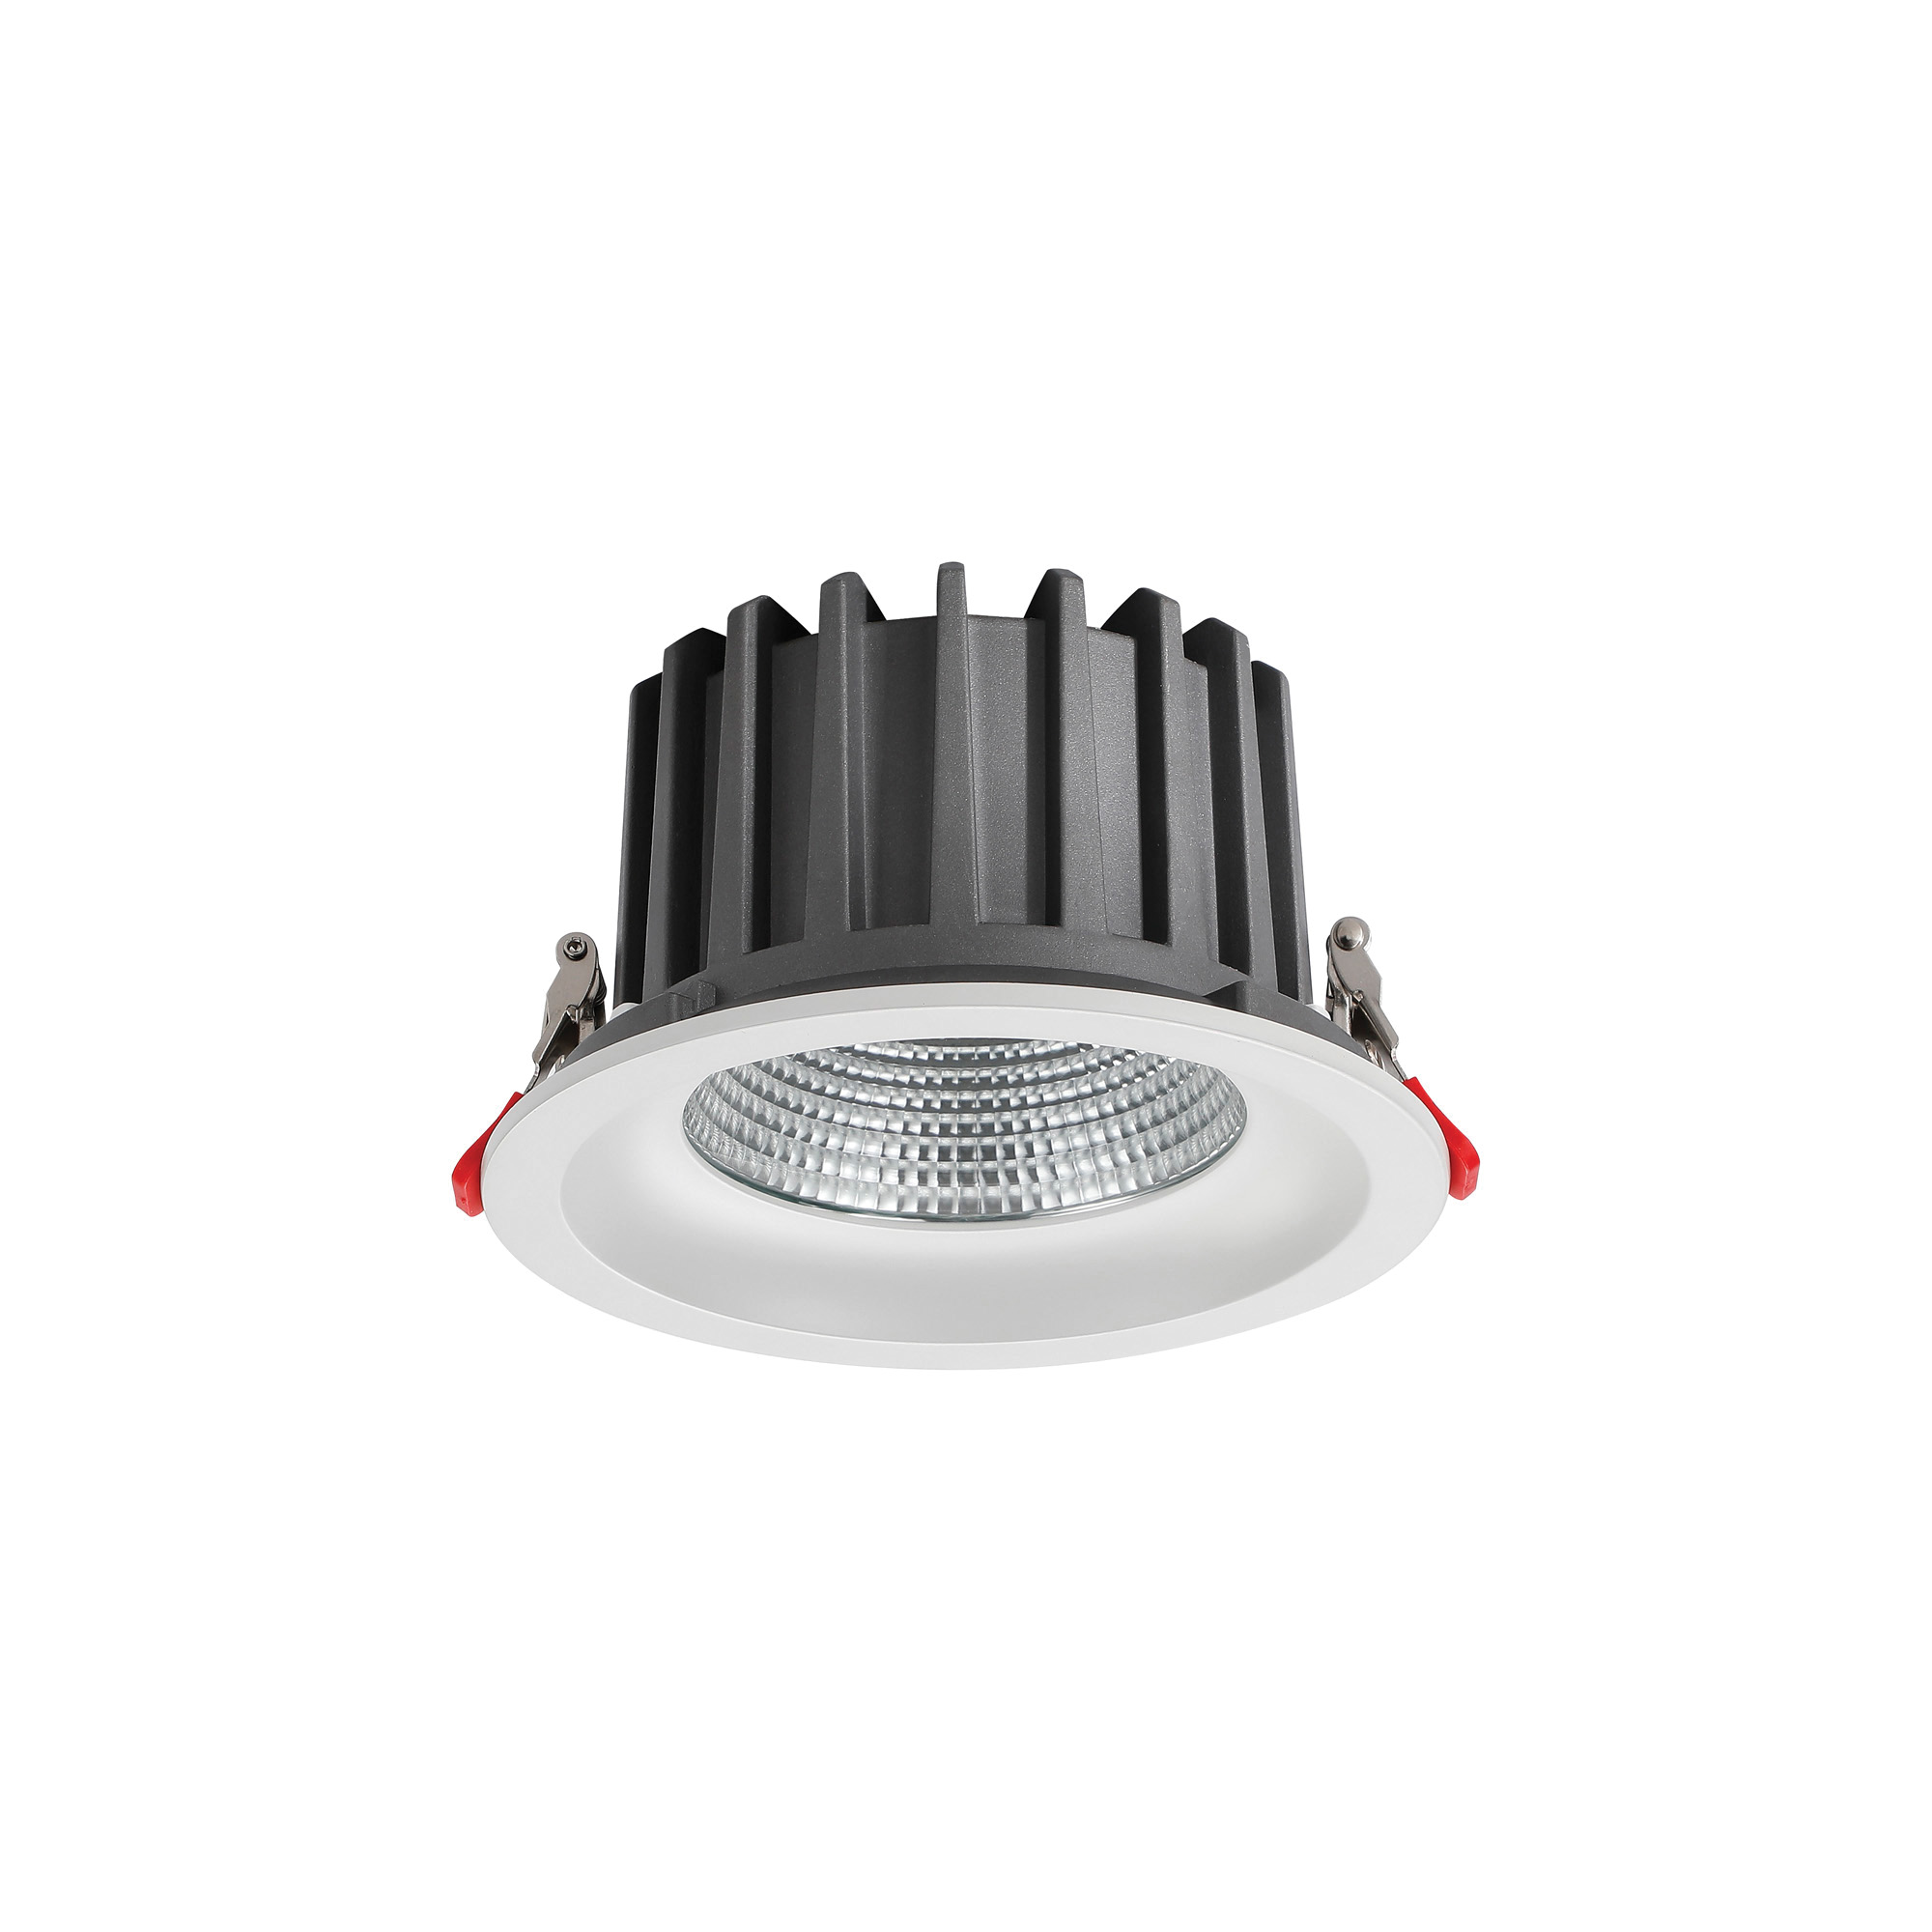 DL200058  Bionic 24; 24W; 700mA; White Deep Round Recessed Downlight; 1920lm ;Cut Out 155mm; 42° ; 3000K; IP44; DRIVER INC.; 5yrs Warranty.